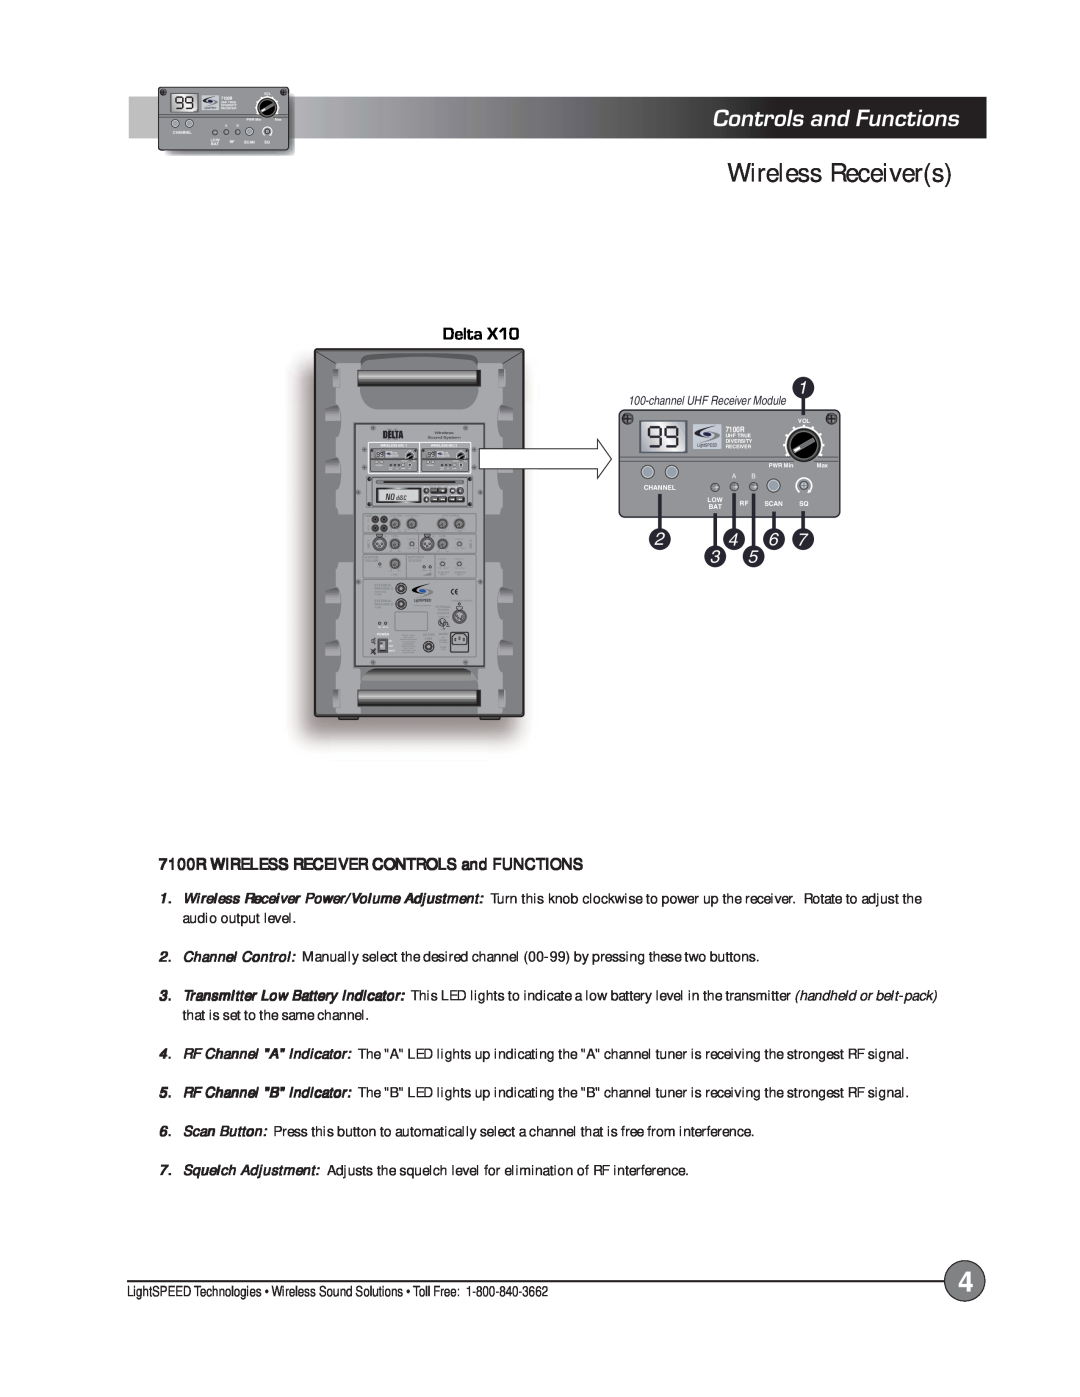 LightSpeed Technologies X12 Wireless Receivers, Controls and Functions, 7100R WIRELESS RECEIVER CONTROLS and FUNCTIONS 